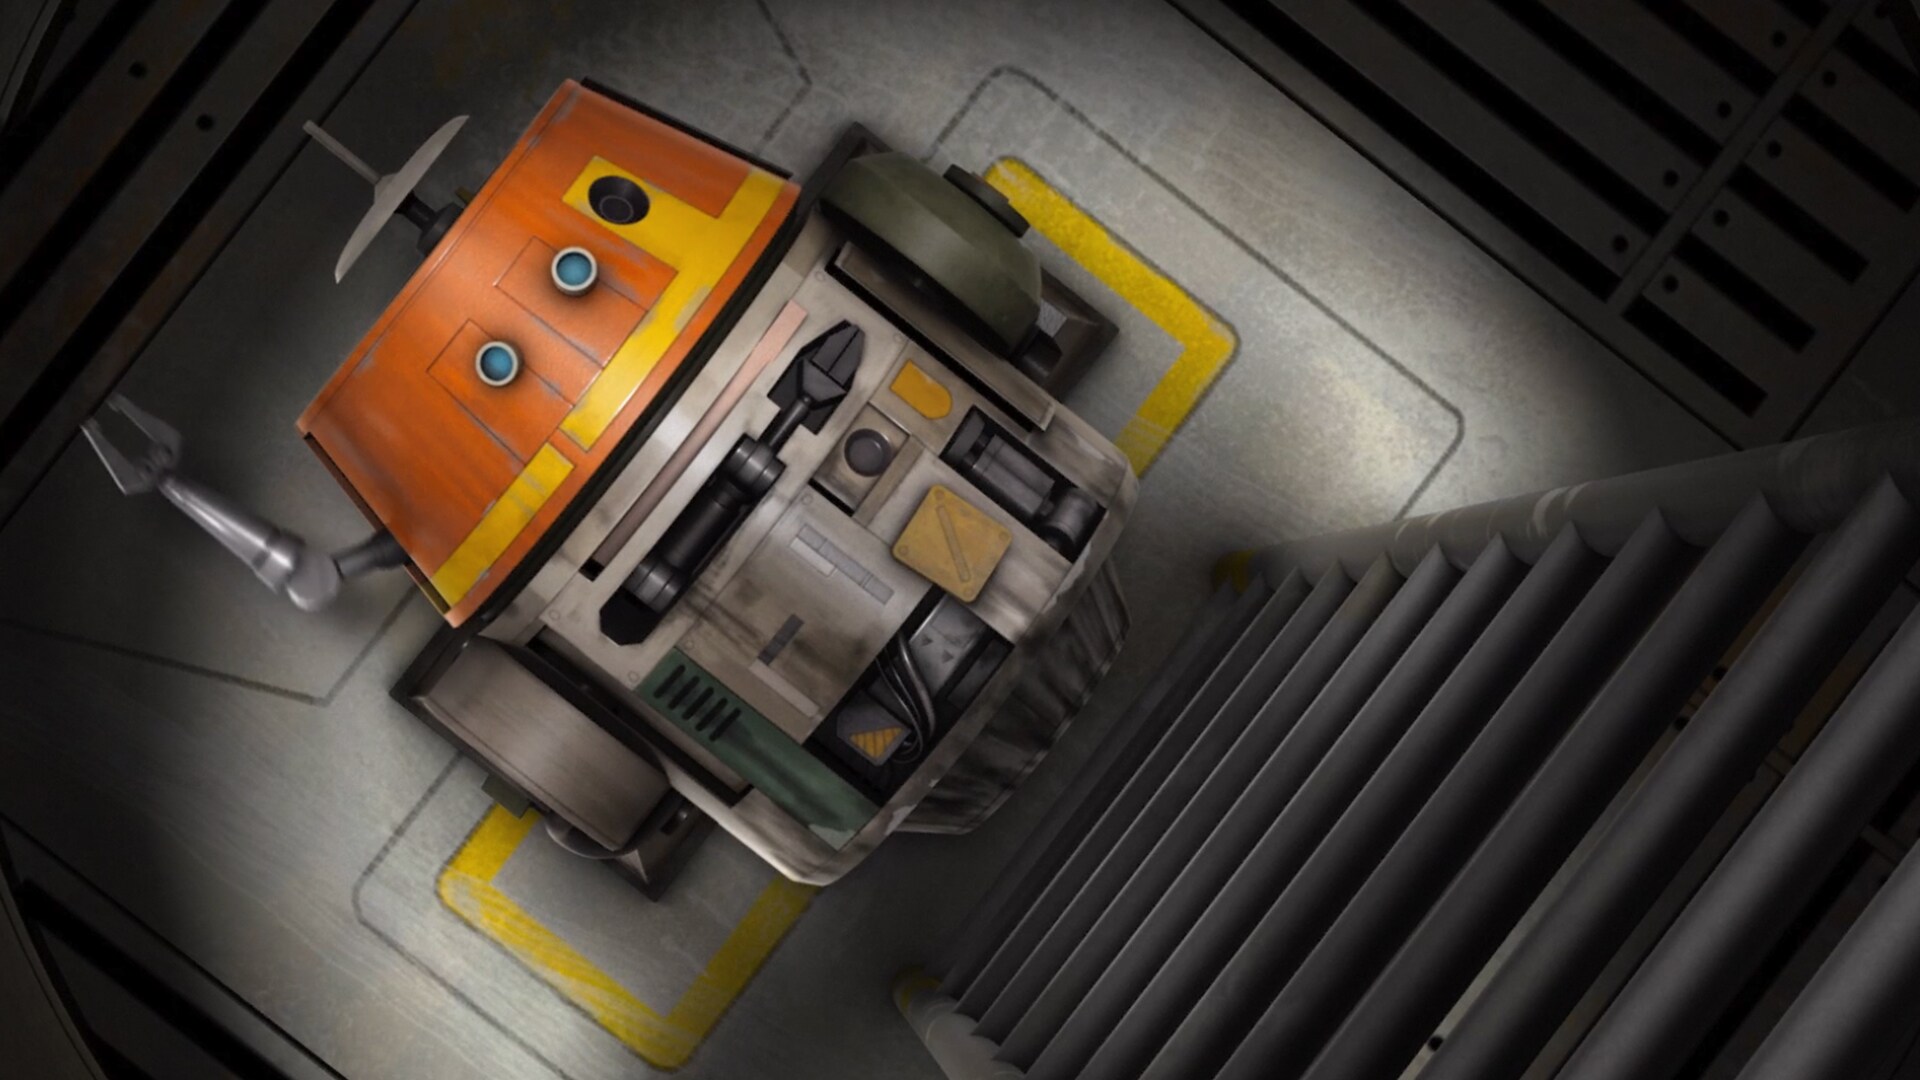 Star Wars Rebels: "The Machine in the Ghost" Short